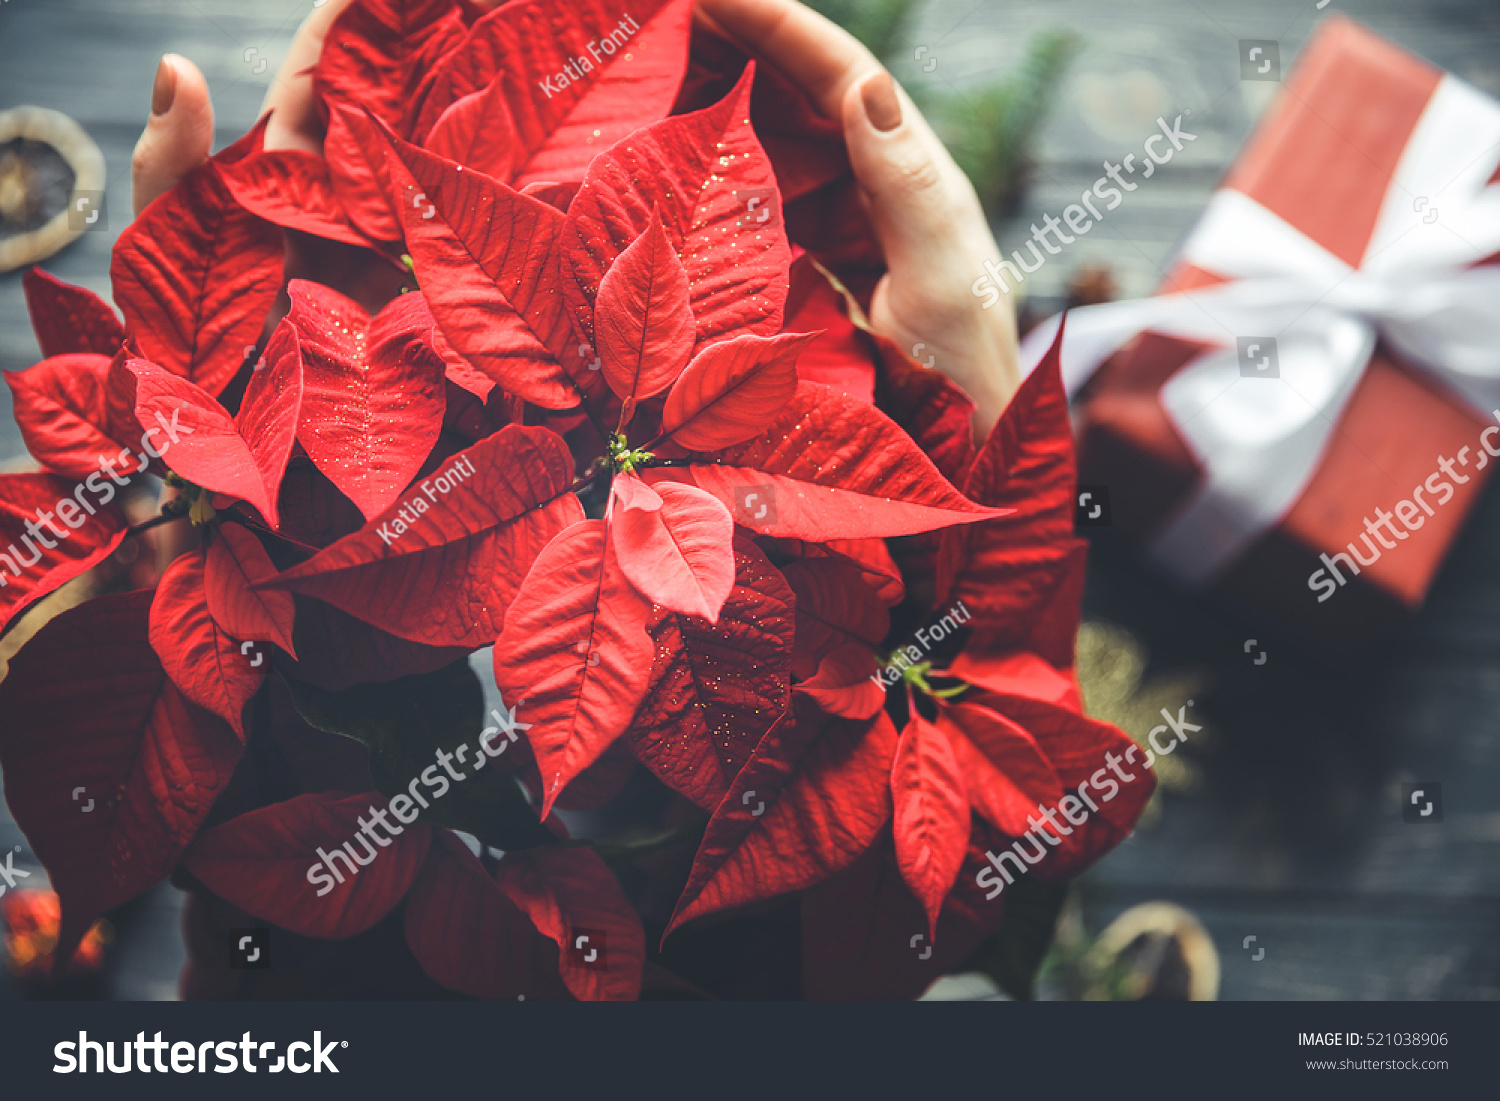 Poinsettia flower in woman hands with gift box on background. Christmas preparing process #521038906